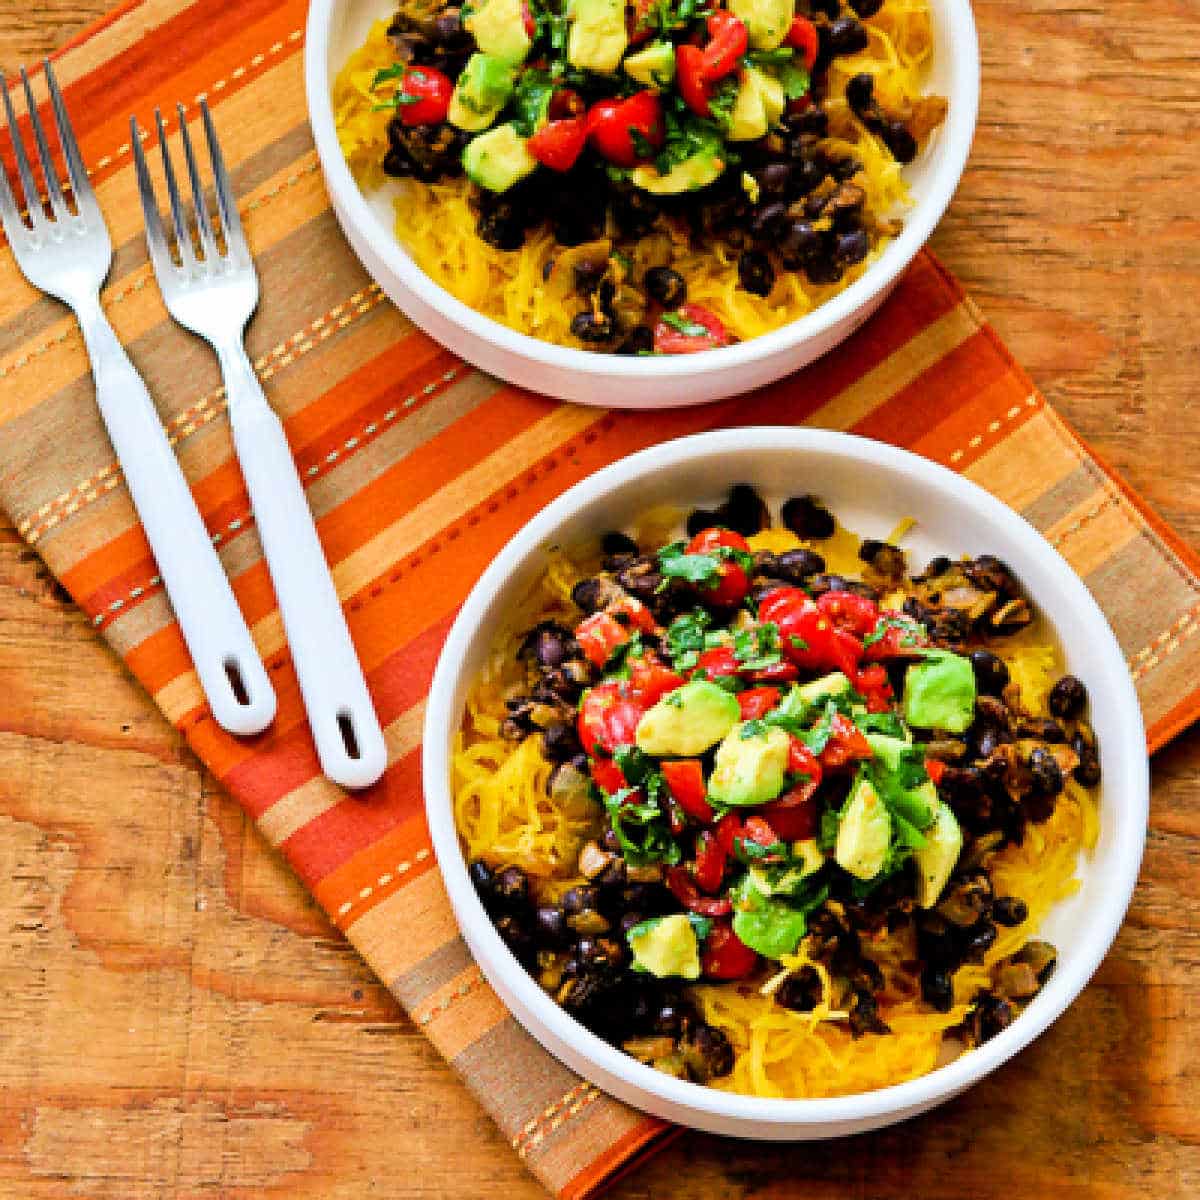 Square image for Spaghetti Squash Burrito Bowl shown in two bowls with forks.